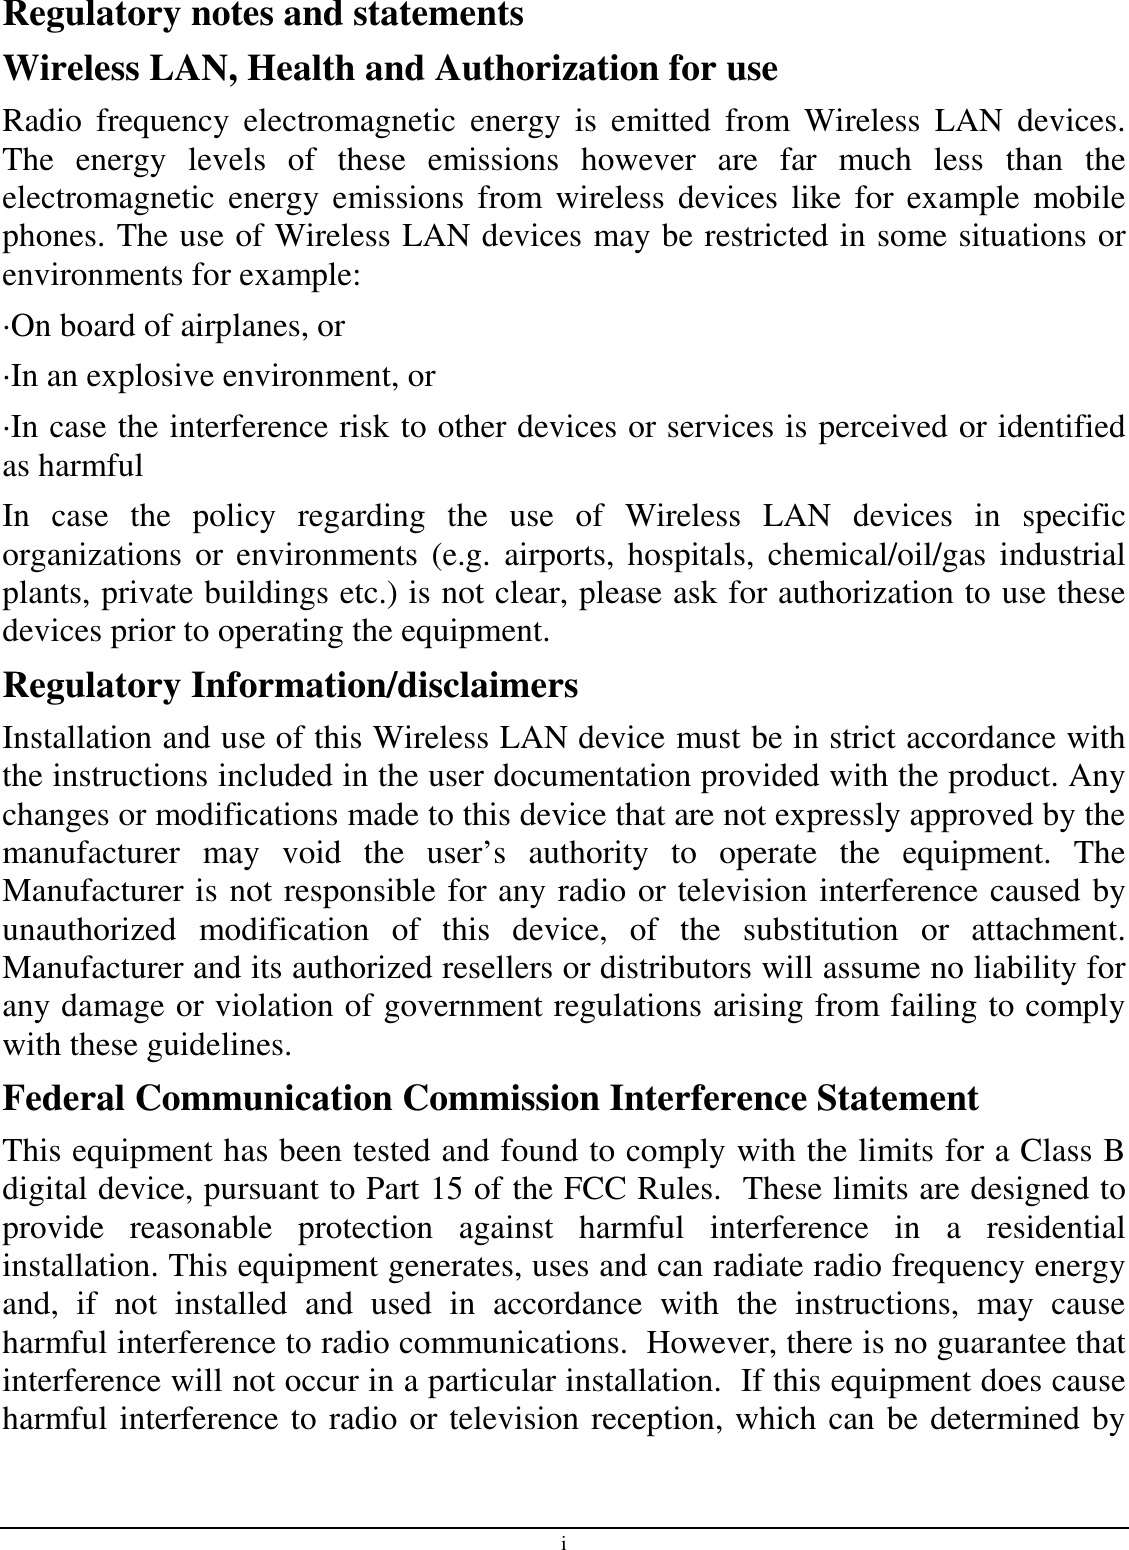 i Regulatory notes and statements Wireless LAN, Health and Authorization for use Radio  frequency  electromagnetic  energy  is  emitted  from  Wireless  LAN  devices. The  energy  levels  of  these  emissions  however  are  far  much  less  than  the electromagnetic  energy  emissions  from  wireless devices like  for example  mobile phones. The use of Wireless LAN devices may be restricted in some situations or environments for example: ·On board of airplanes, or ·In an explosive environment, or ·In case the interference risk to other devices or services is perceived or identified as harmful In  case  the  policy  regarding  the  use  of  Wireless  LAN  devices  in  specific organizations  or  environments  (e.g.  airports,  hospitals,  chemical/oil/gas  industrial plants, private buildings etc.) is not clear, please ask for authorization to use these devices prior to operating the equipment. Regulatory Information/disclaimers Installation and use of this Wireless LAN device must be in strict accordance with the instructions included in the user documentation provided with the product. Any changes or modifications made to this device that are not expressly approved by the manufacturer  may  void  the  user’s  authority  to  operate  the  equipment.  The Manufacturer is not responsible for any radio or television interference caused by unauthorized  modification  of  this  device,  of  the  substitution  or  attachment. Manufacturer and its authorized resellers or distributors will assume no liability for any damage or violation of government regulations arising from failing to comply with these guidelines. Federal Communication Commission Interference Statement This equipment has been tested and found to comply with the limits for a Class B digital device, pursuant to Part 15 of the FCC Rules.  These limits are designed to provide  reasonable  protection  against  harmful  interference  in  a  residential installation. This equipment generates, uses and can radiate radio frequency energy and,  if  not  installed  and  used  in  accordance  with  the  instructions,  may  cause harmful interference to radio communications.  However, there is no guarantee that interference will not occur in a particular installation.  If this equipment does cause harmful interference to radio or television reception, which can be determined by 